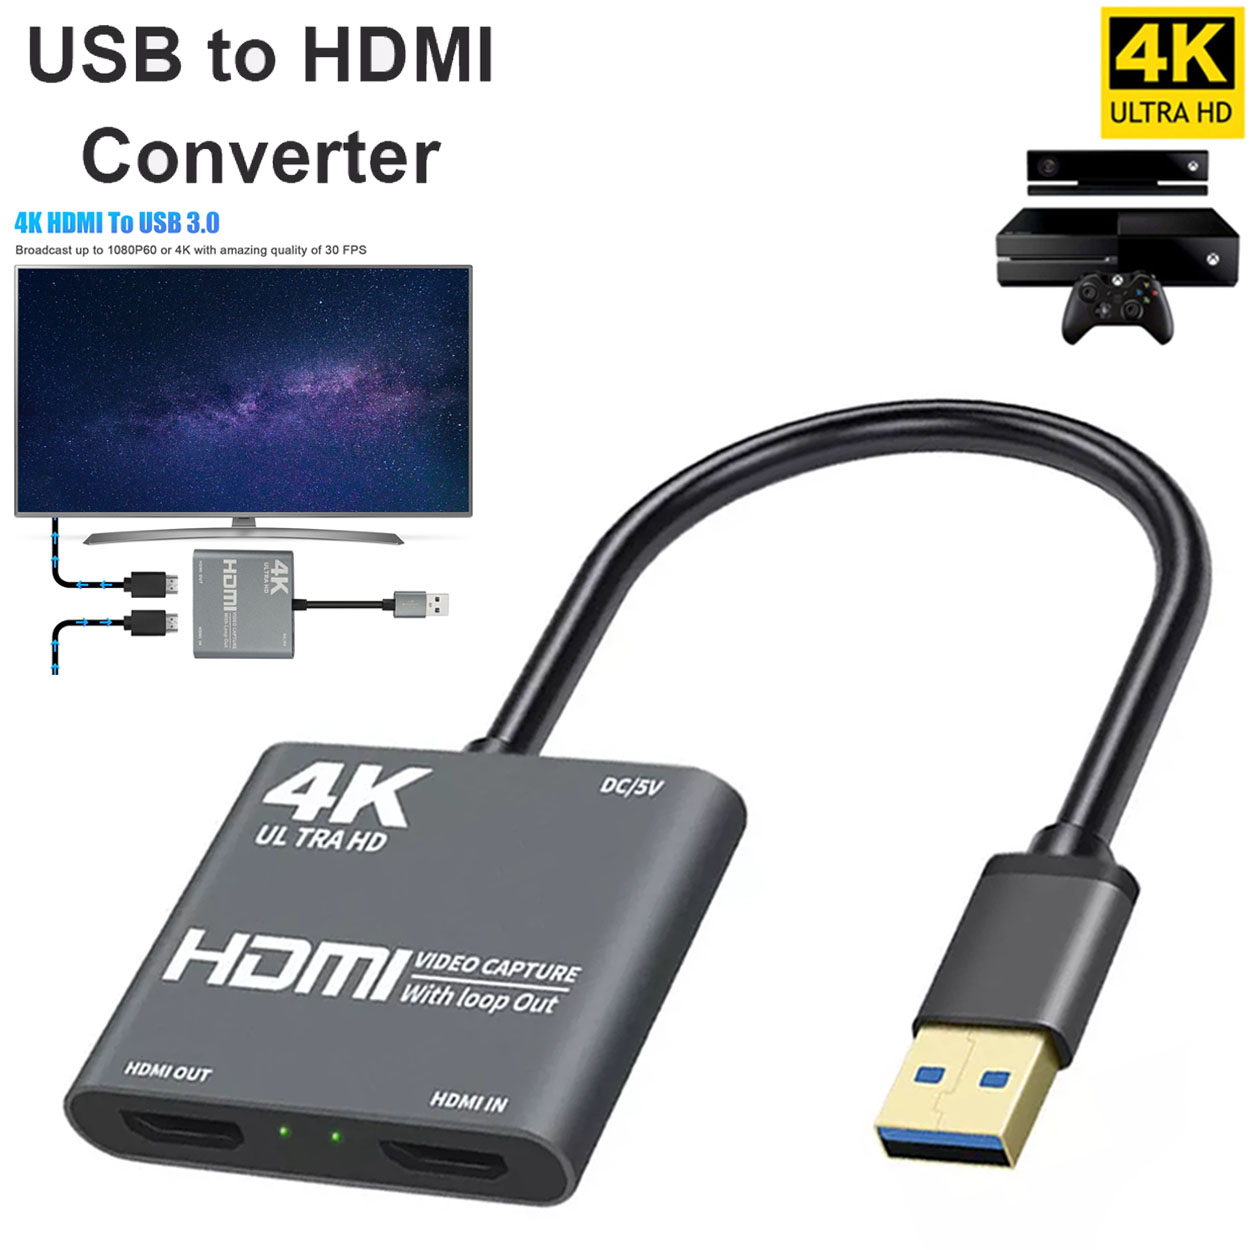 HDMI Video Capture Card USB 3.0 1080p HD Recorder For Game/Video Live Streaming 